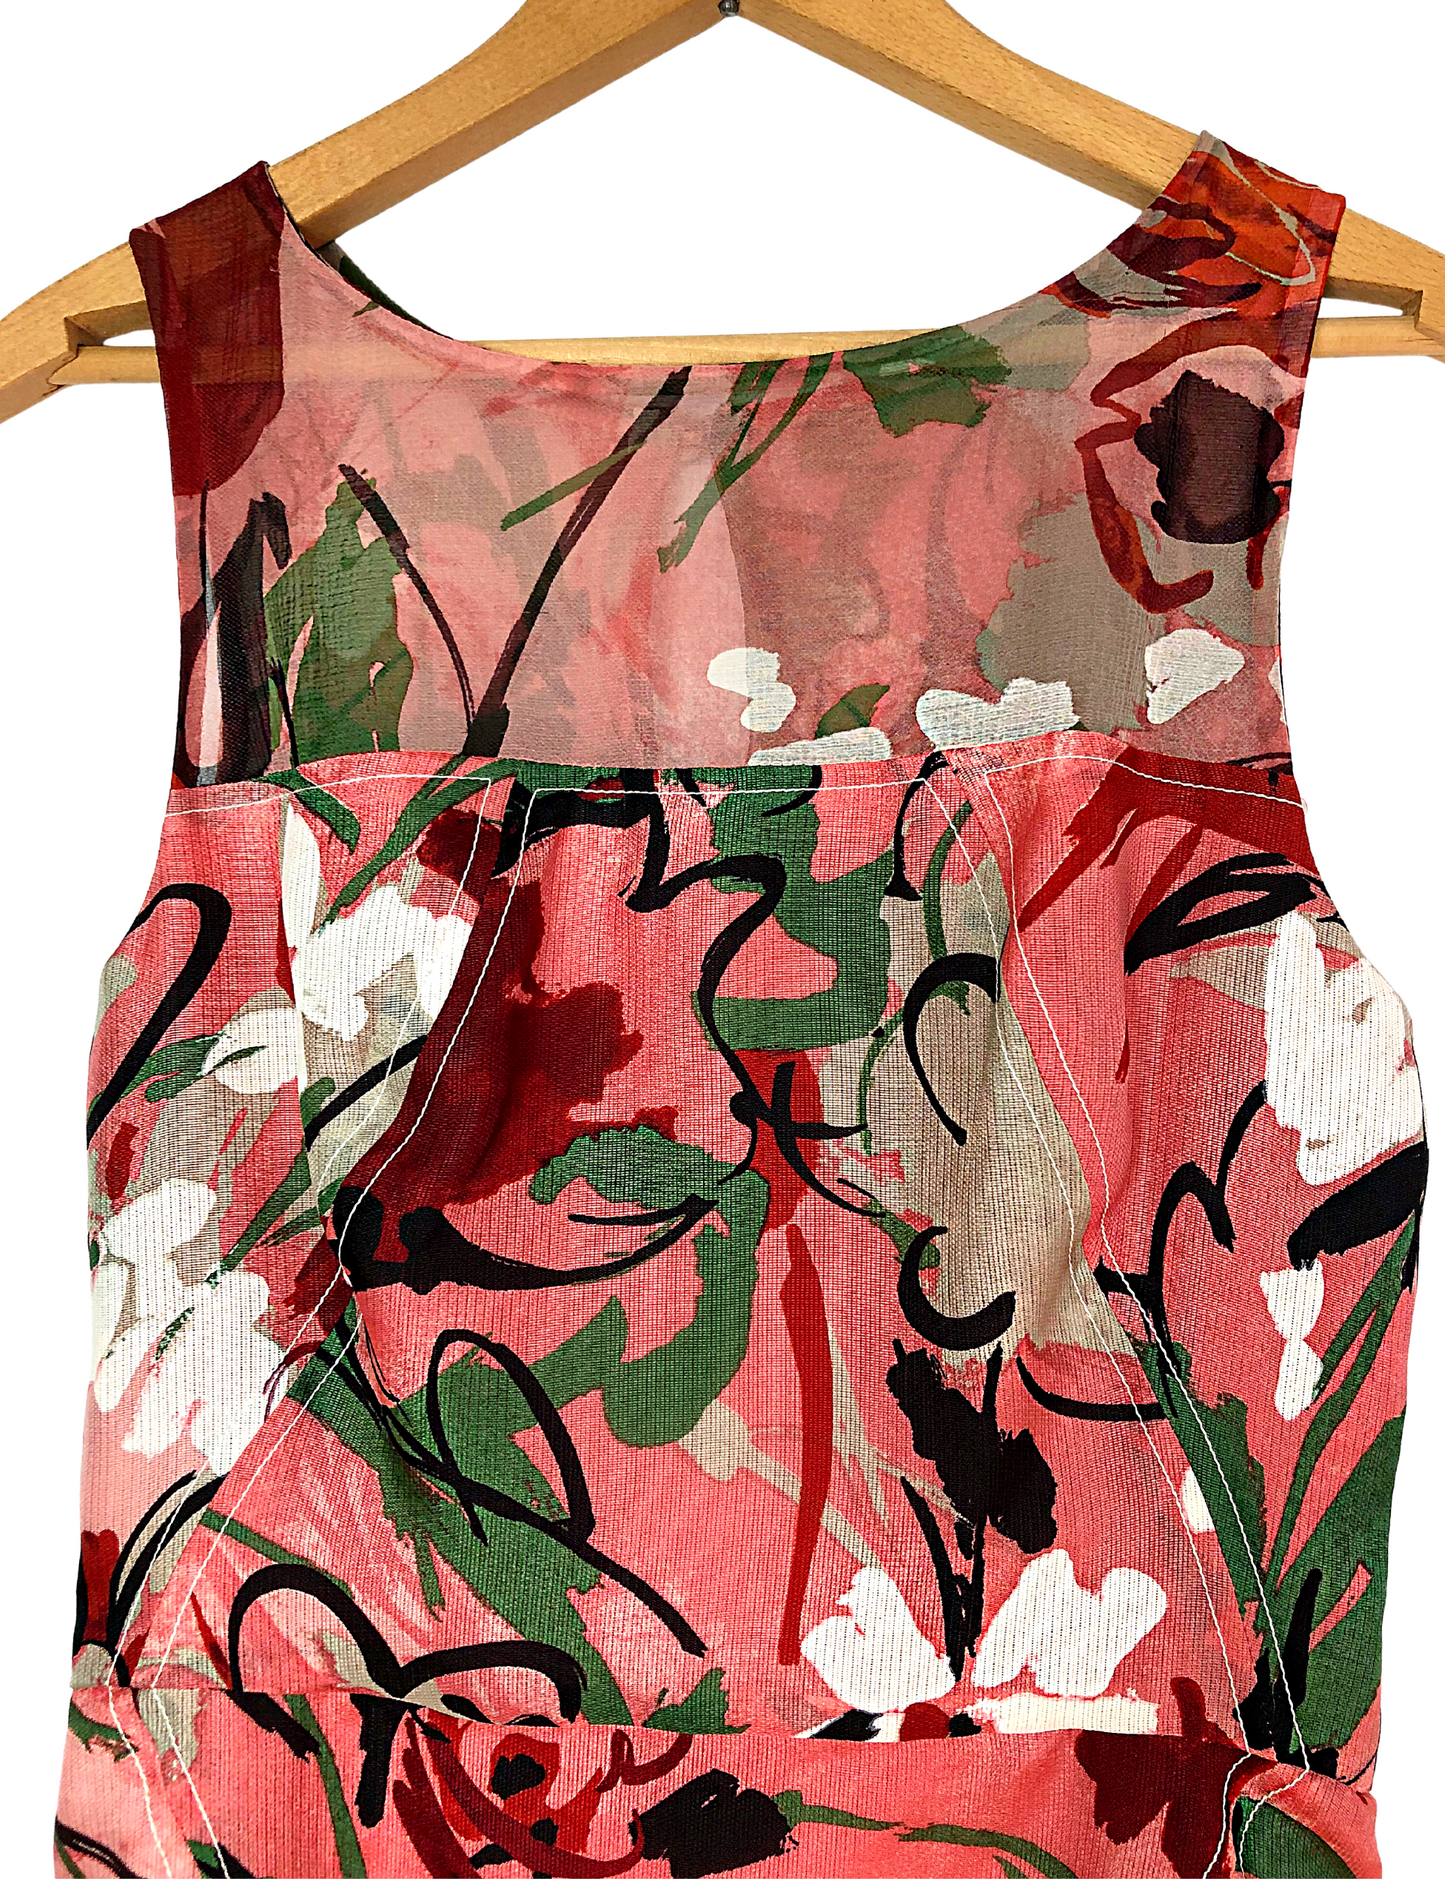 00’s Carolina Herrera Pink Abstract Floral Printed Silk Casual Cocktail A-Line Sheer Dress Size 4